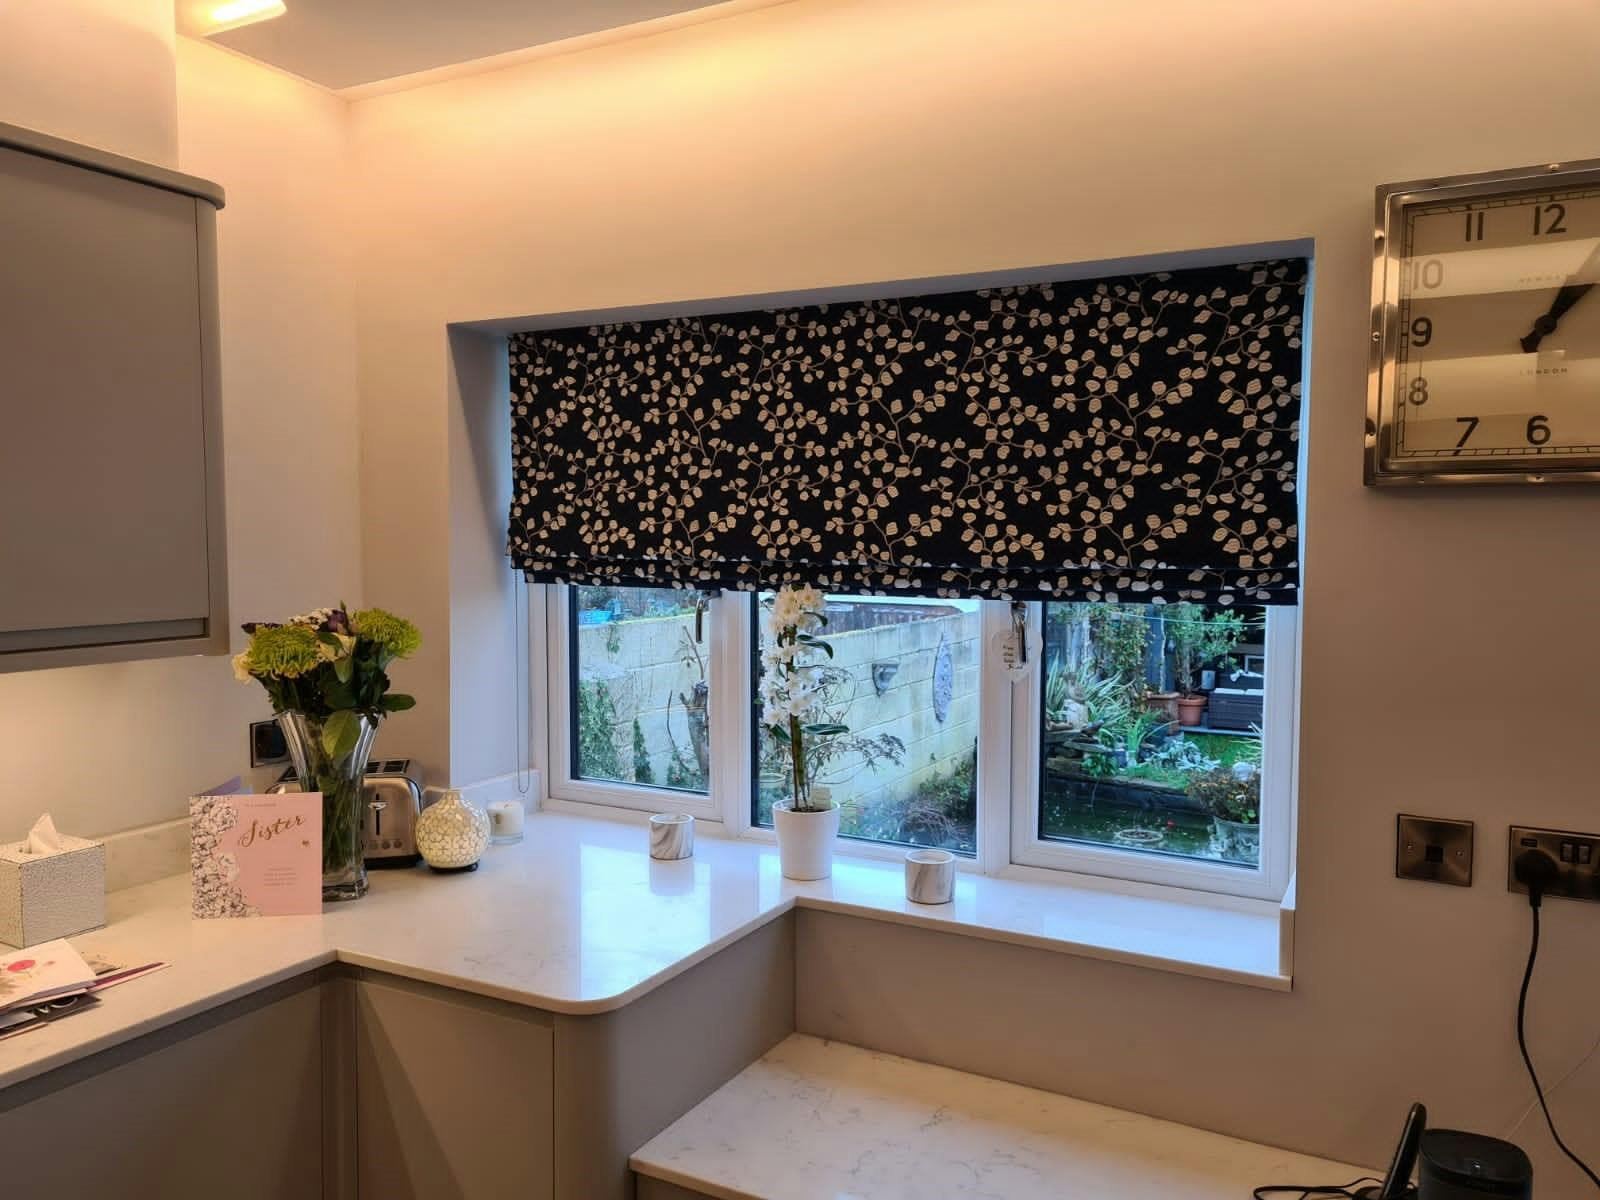 Some black and white floral patterned roman blinds overlooking a courtyard garden